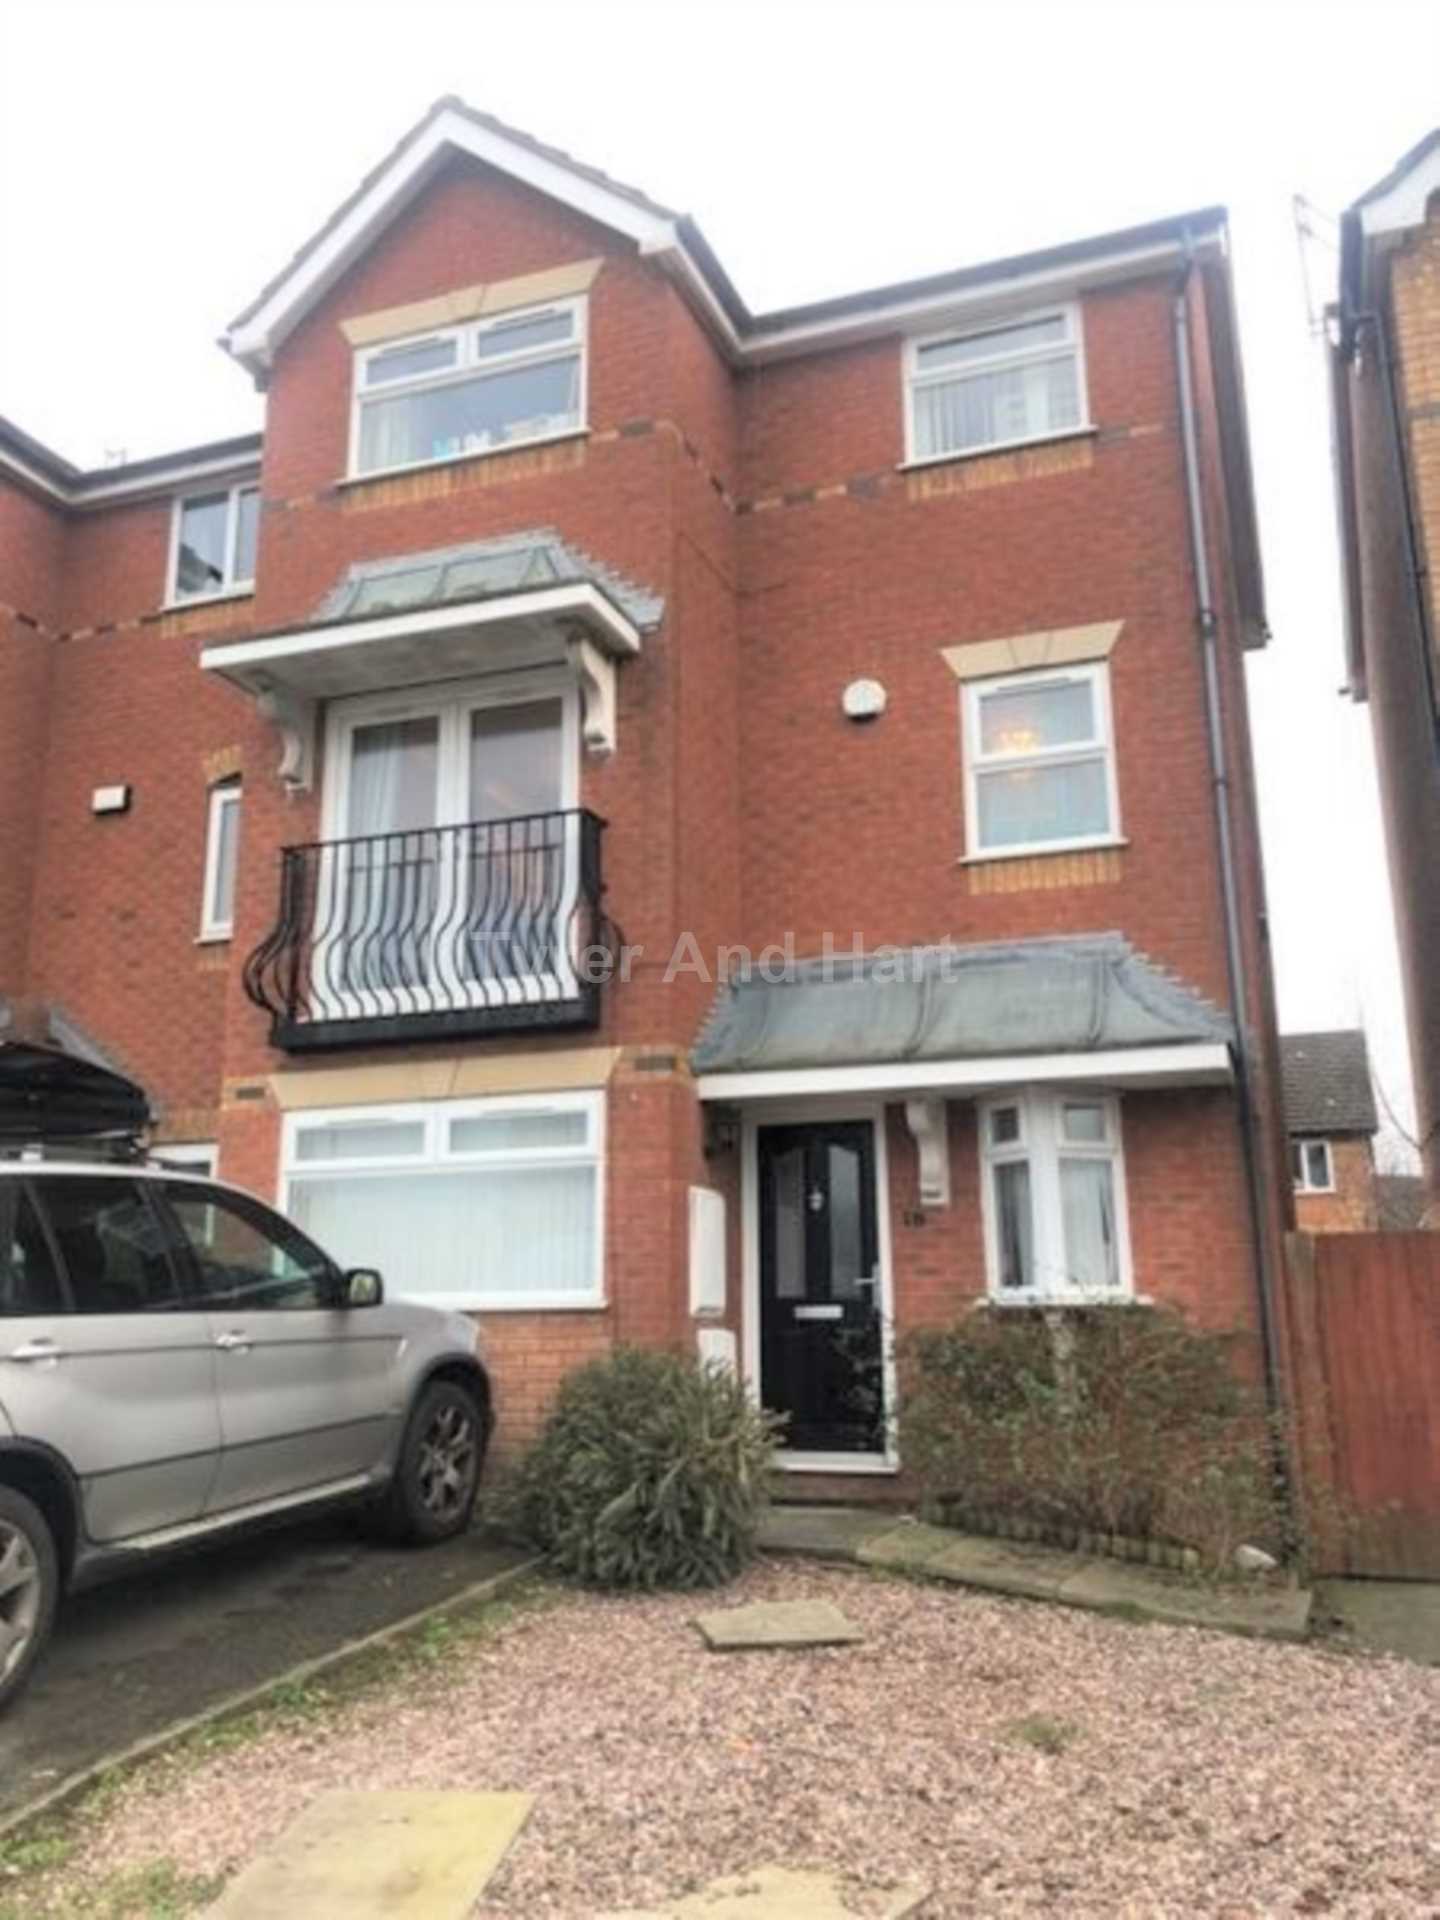 4 bed Semi-Detached House for rent in Liverpool. From Tyrer & Hart Property Specialists